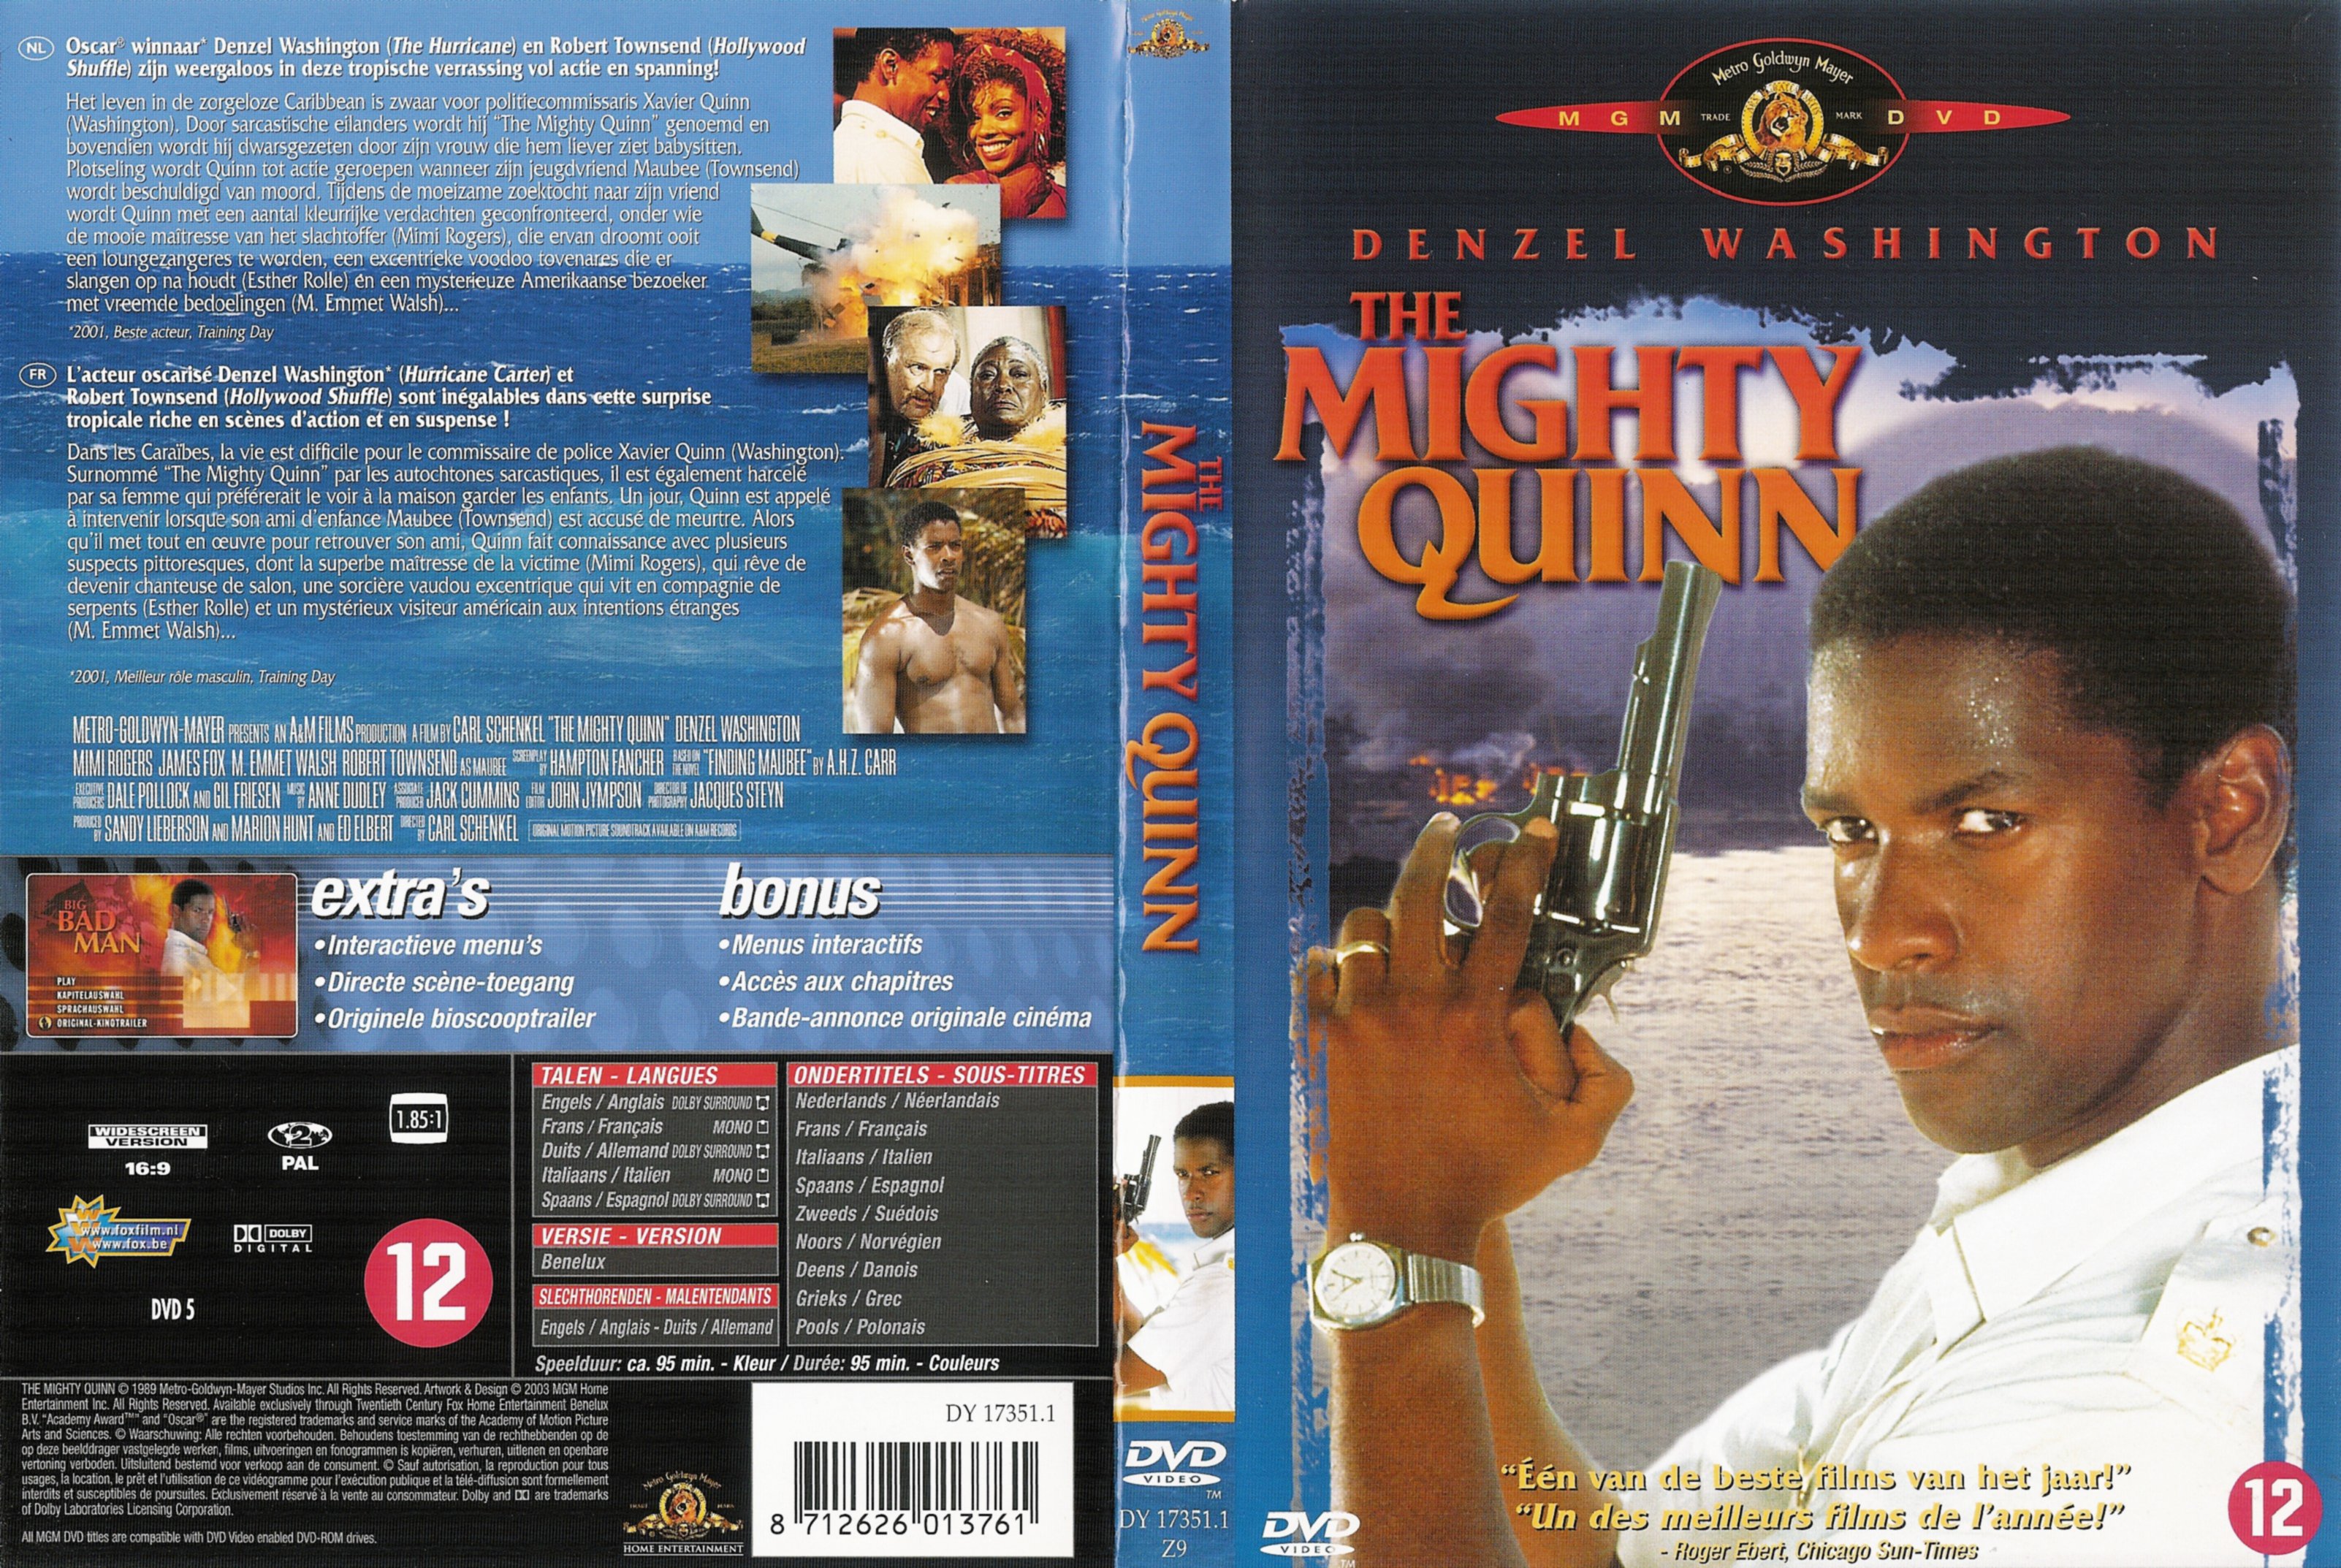 Jaquette DVD The mighty Quinn